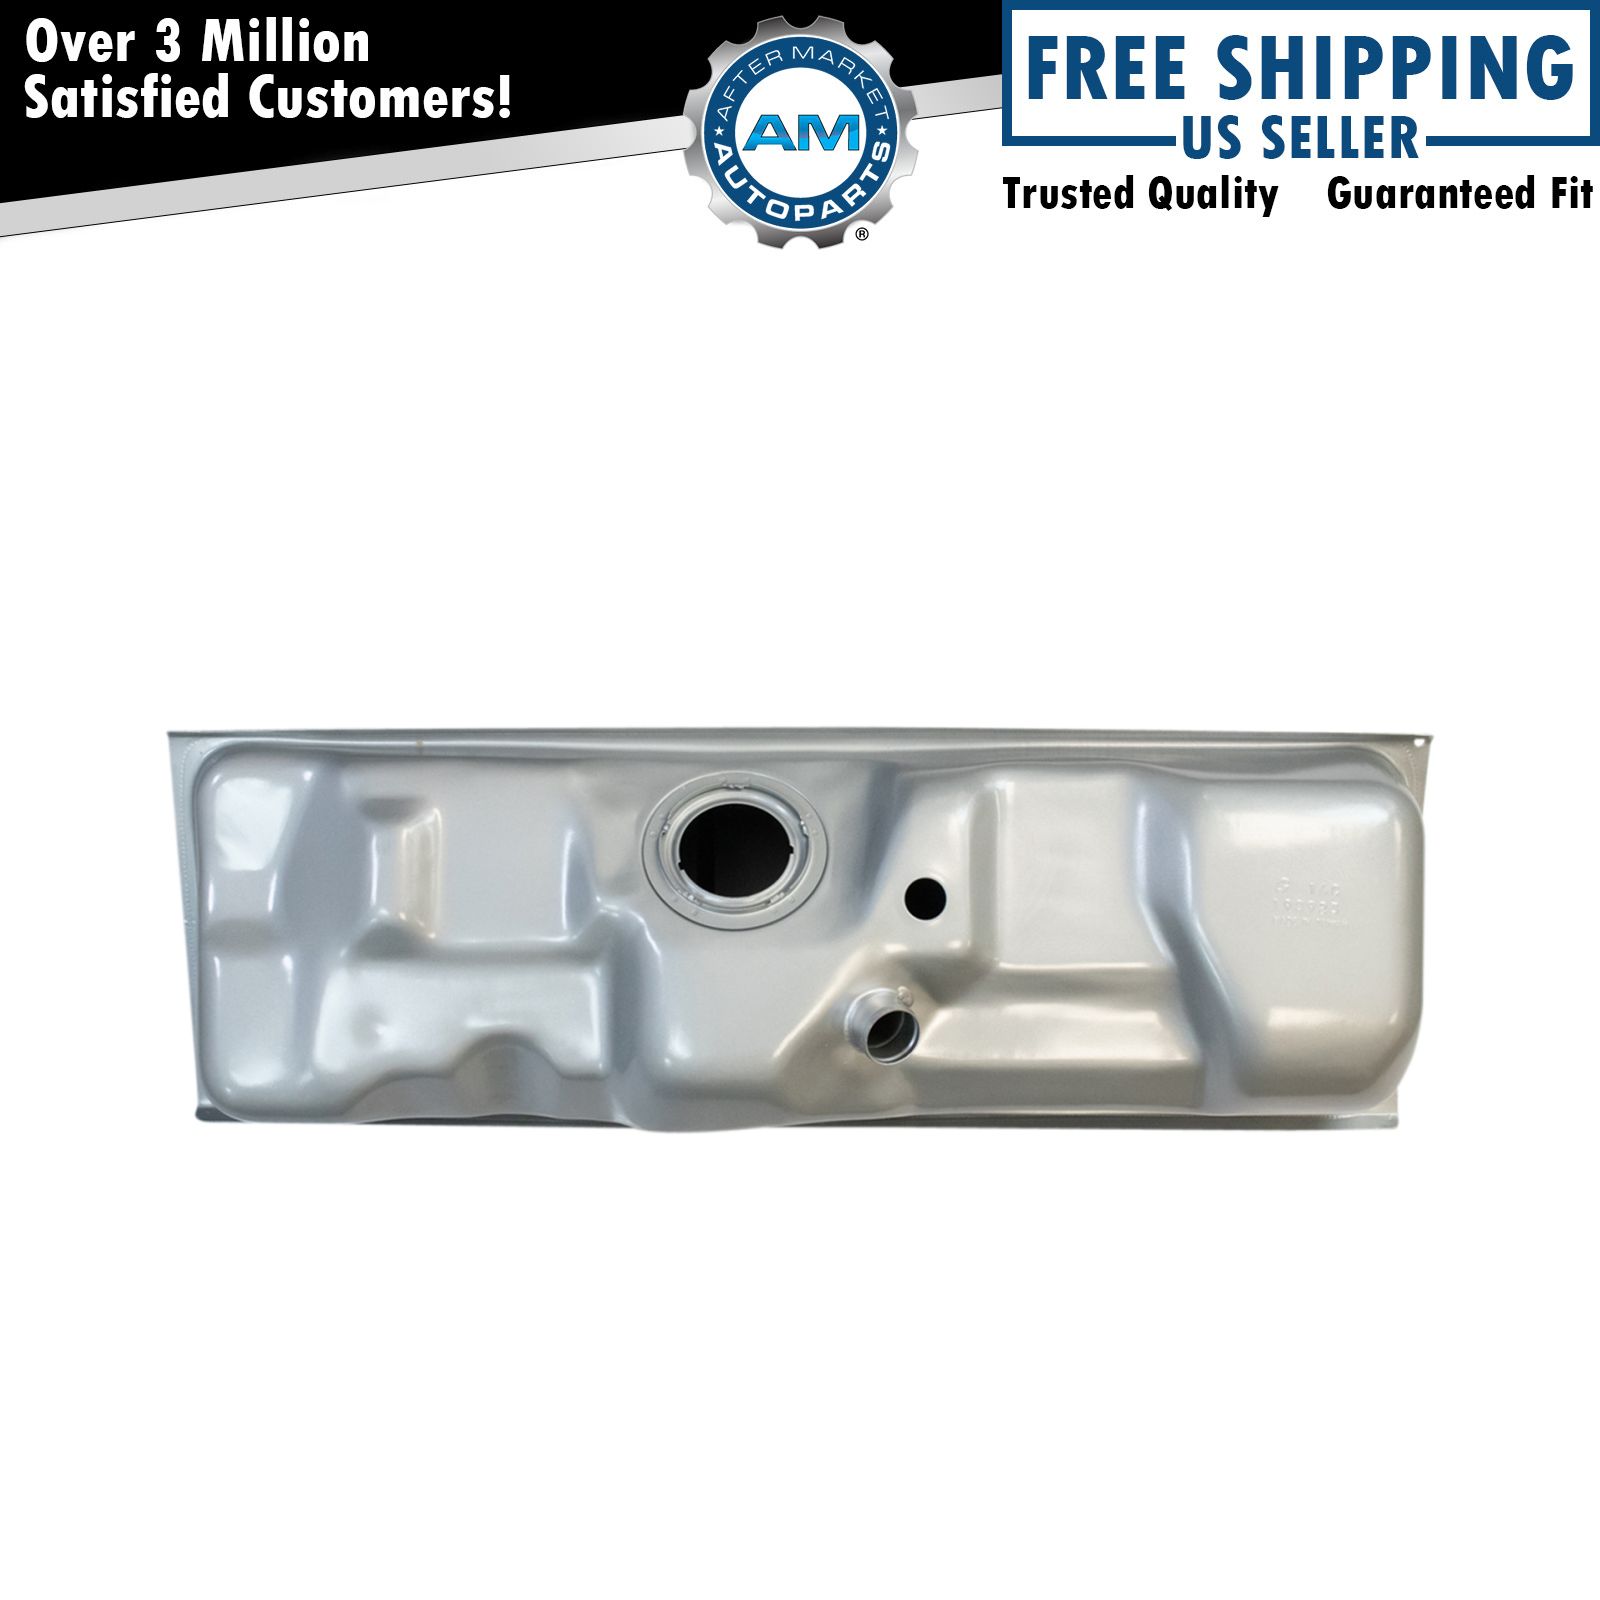 Side Mount Fuel Gas Tank for 90-97 Ford F150 F250 F350 Truck 16 Gallon